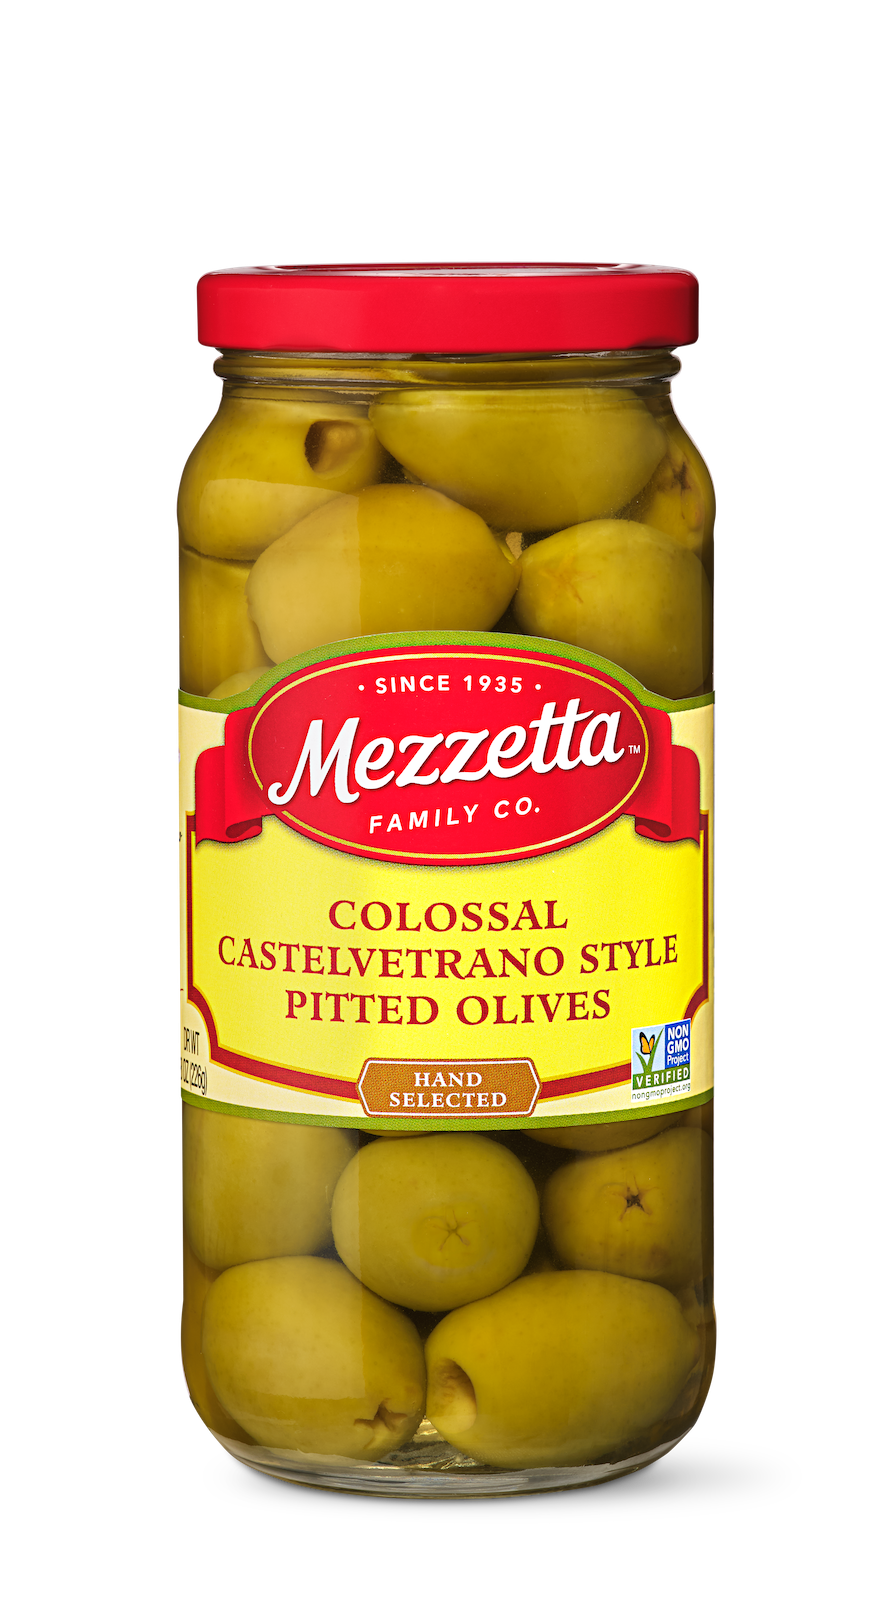 Colossal Castelvetrano Style Pitted Olives